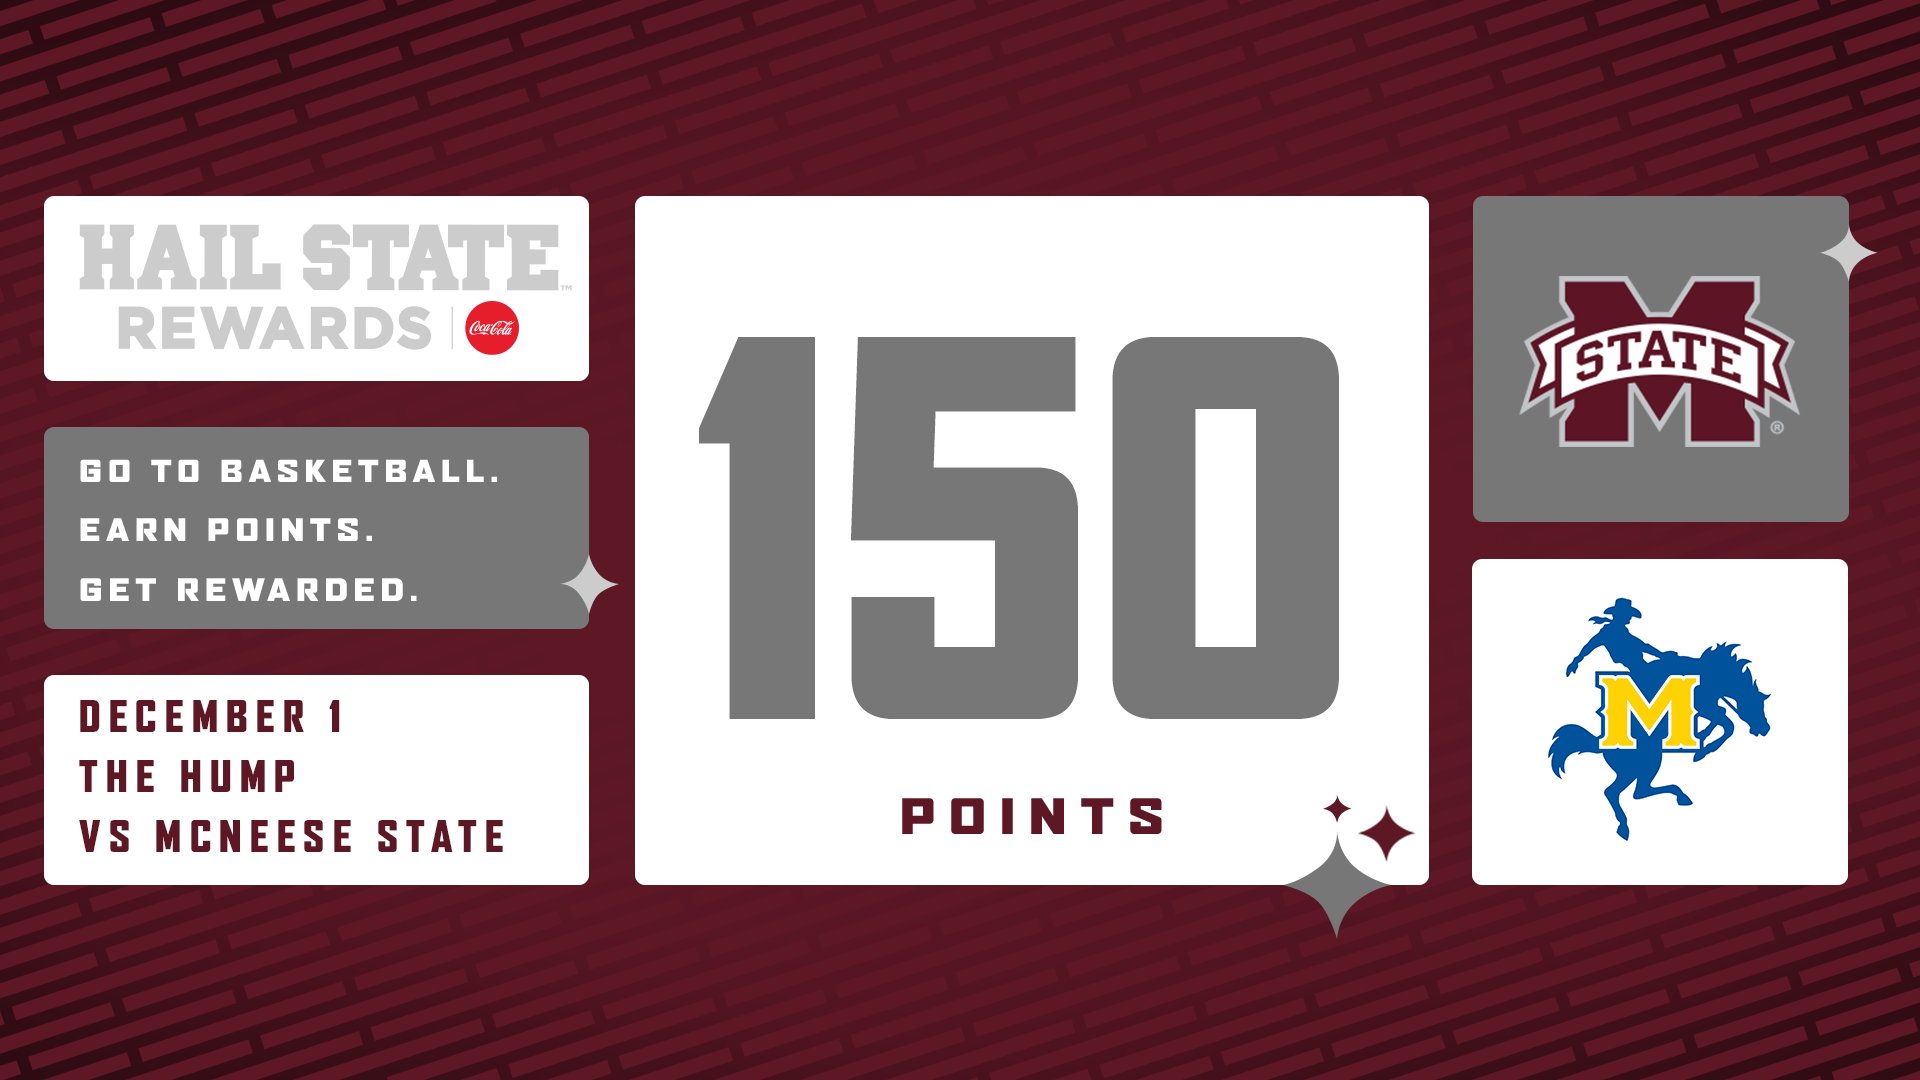 Maroon and white graphic announcing that Hail State Rewards members will receive 150 points for attendance at MSU's women's basketball game on Dec. 1